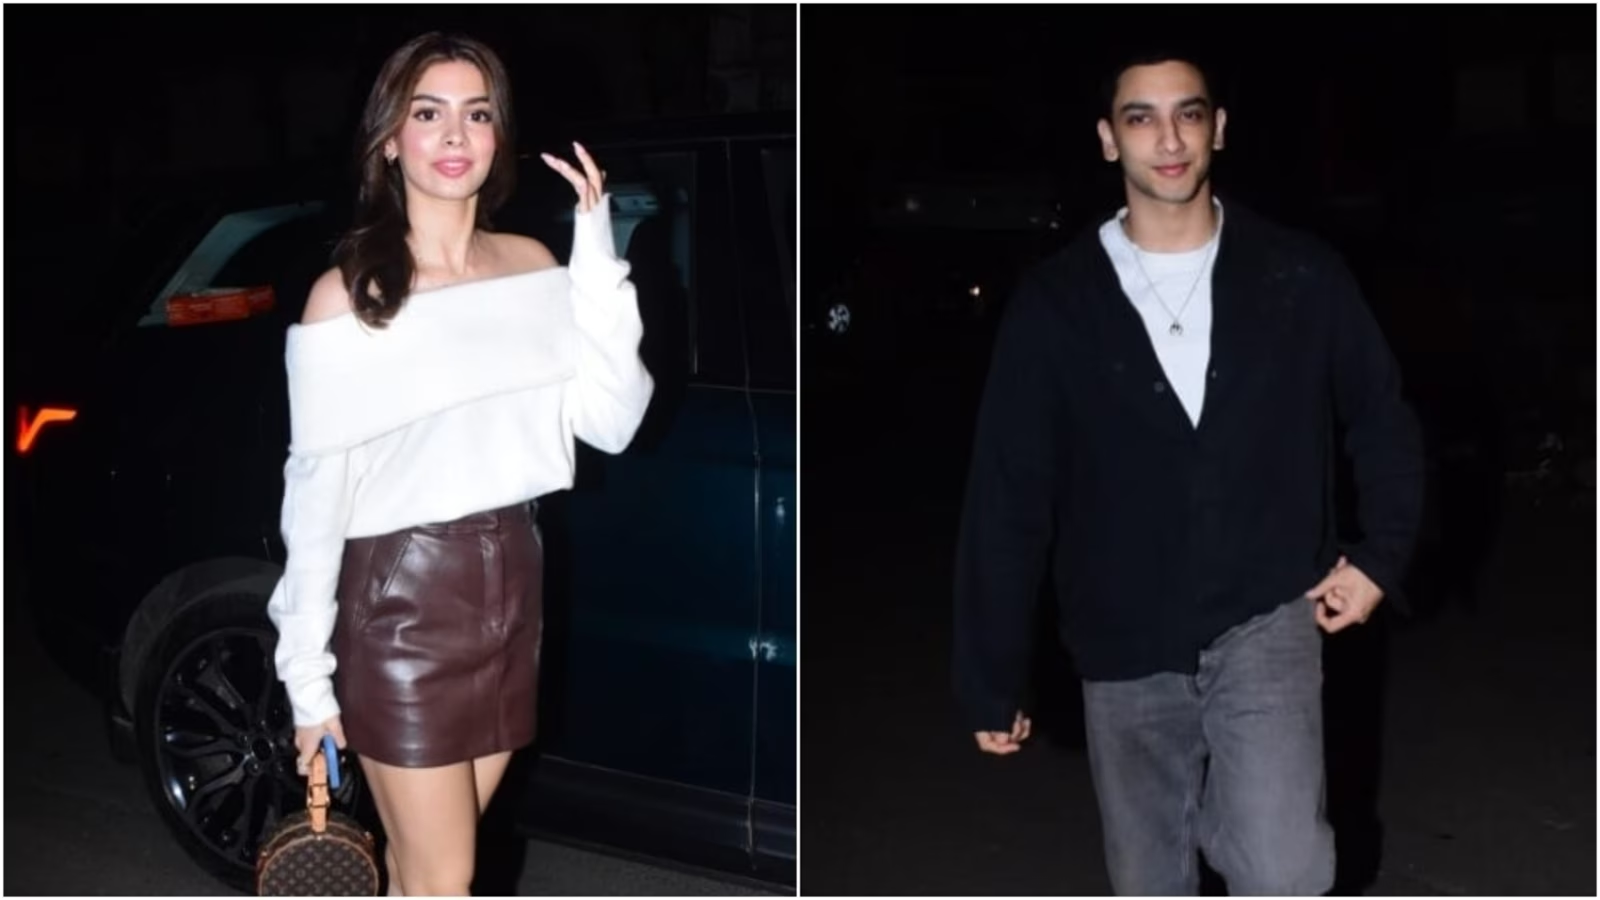  Khushi Kapoor Nails Casual Chic: Sporting a Sweater and Mini Skirt on Outing with Vedang Raina and Friends, Demonstrating Stylish Ways to Rock Neutral Shades